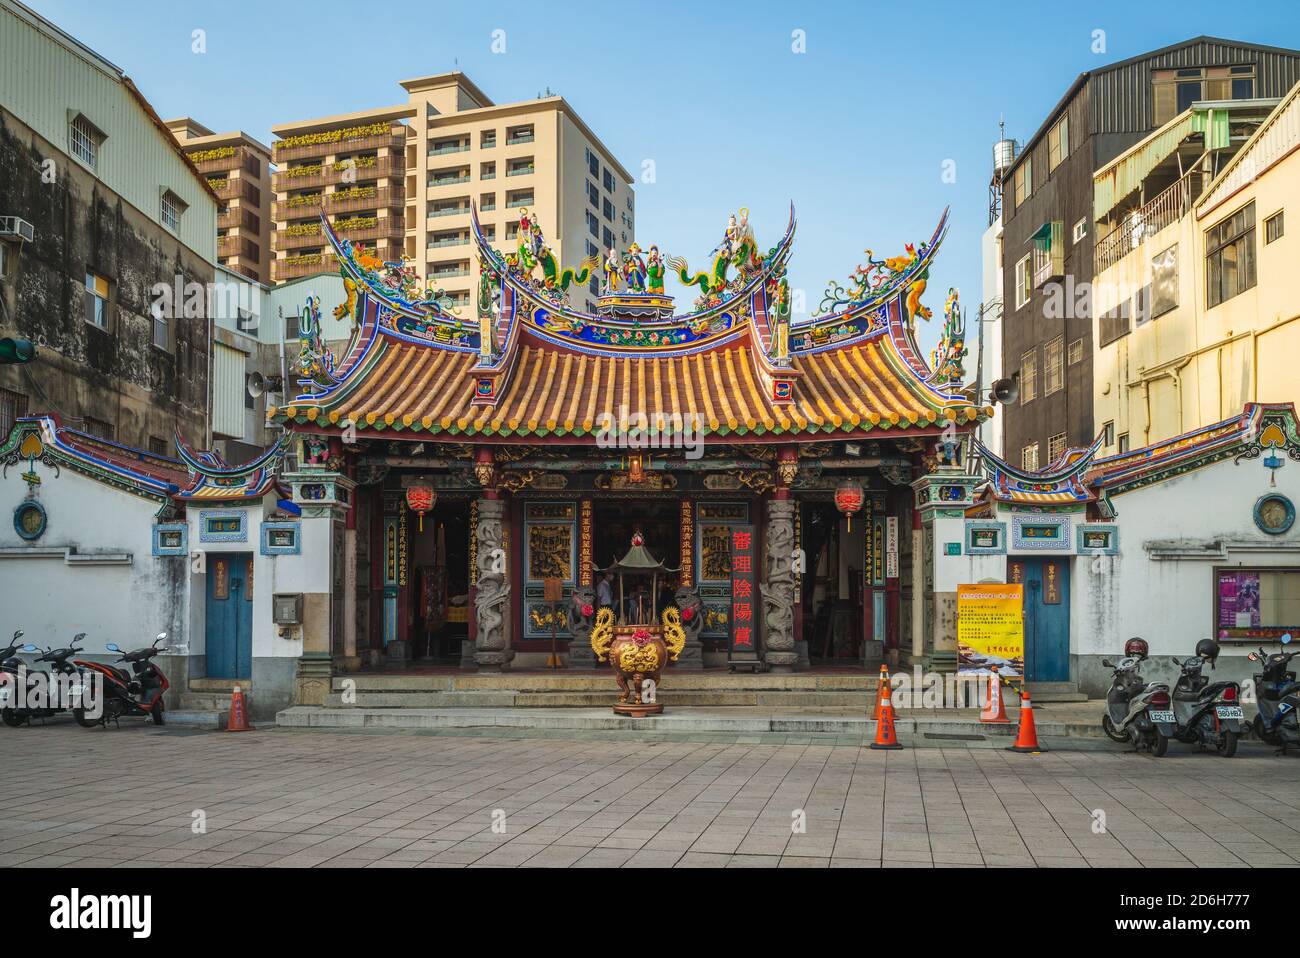 October 16, 2020: Taiwanfu Cheng Huang City God Temple in tainan, taiwan. It is a Taoist temple dedicated to City God Cheng Huang, who acts as a prose Stock Photo